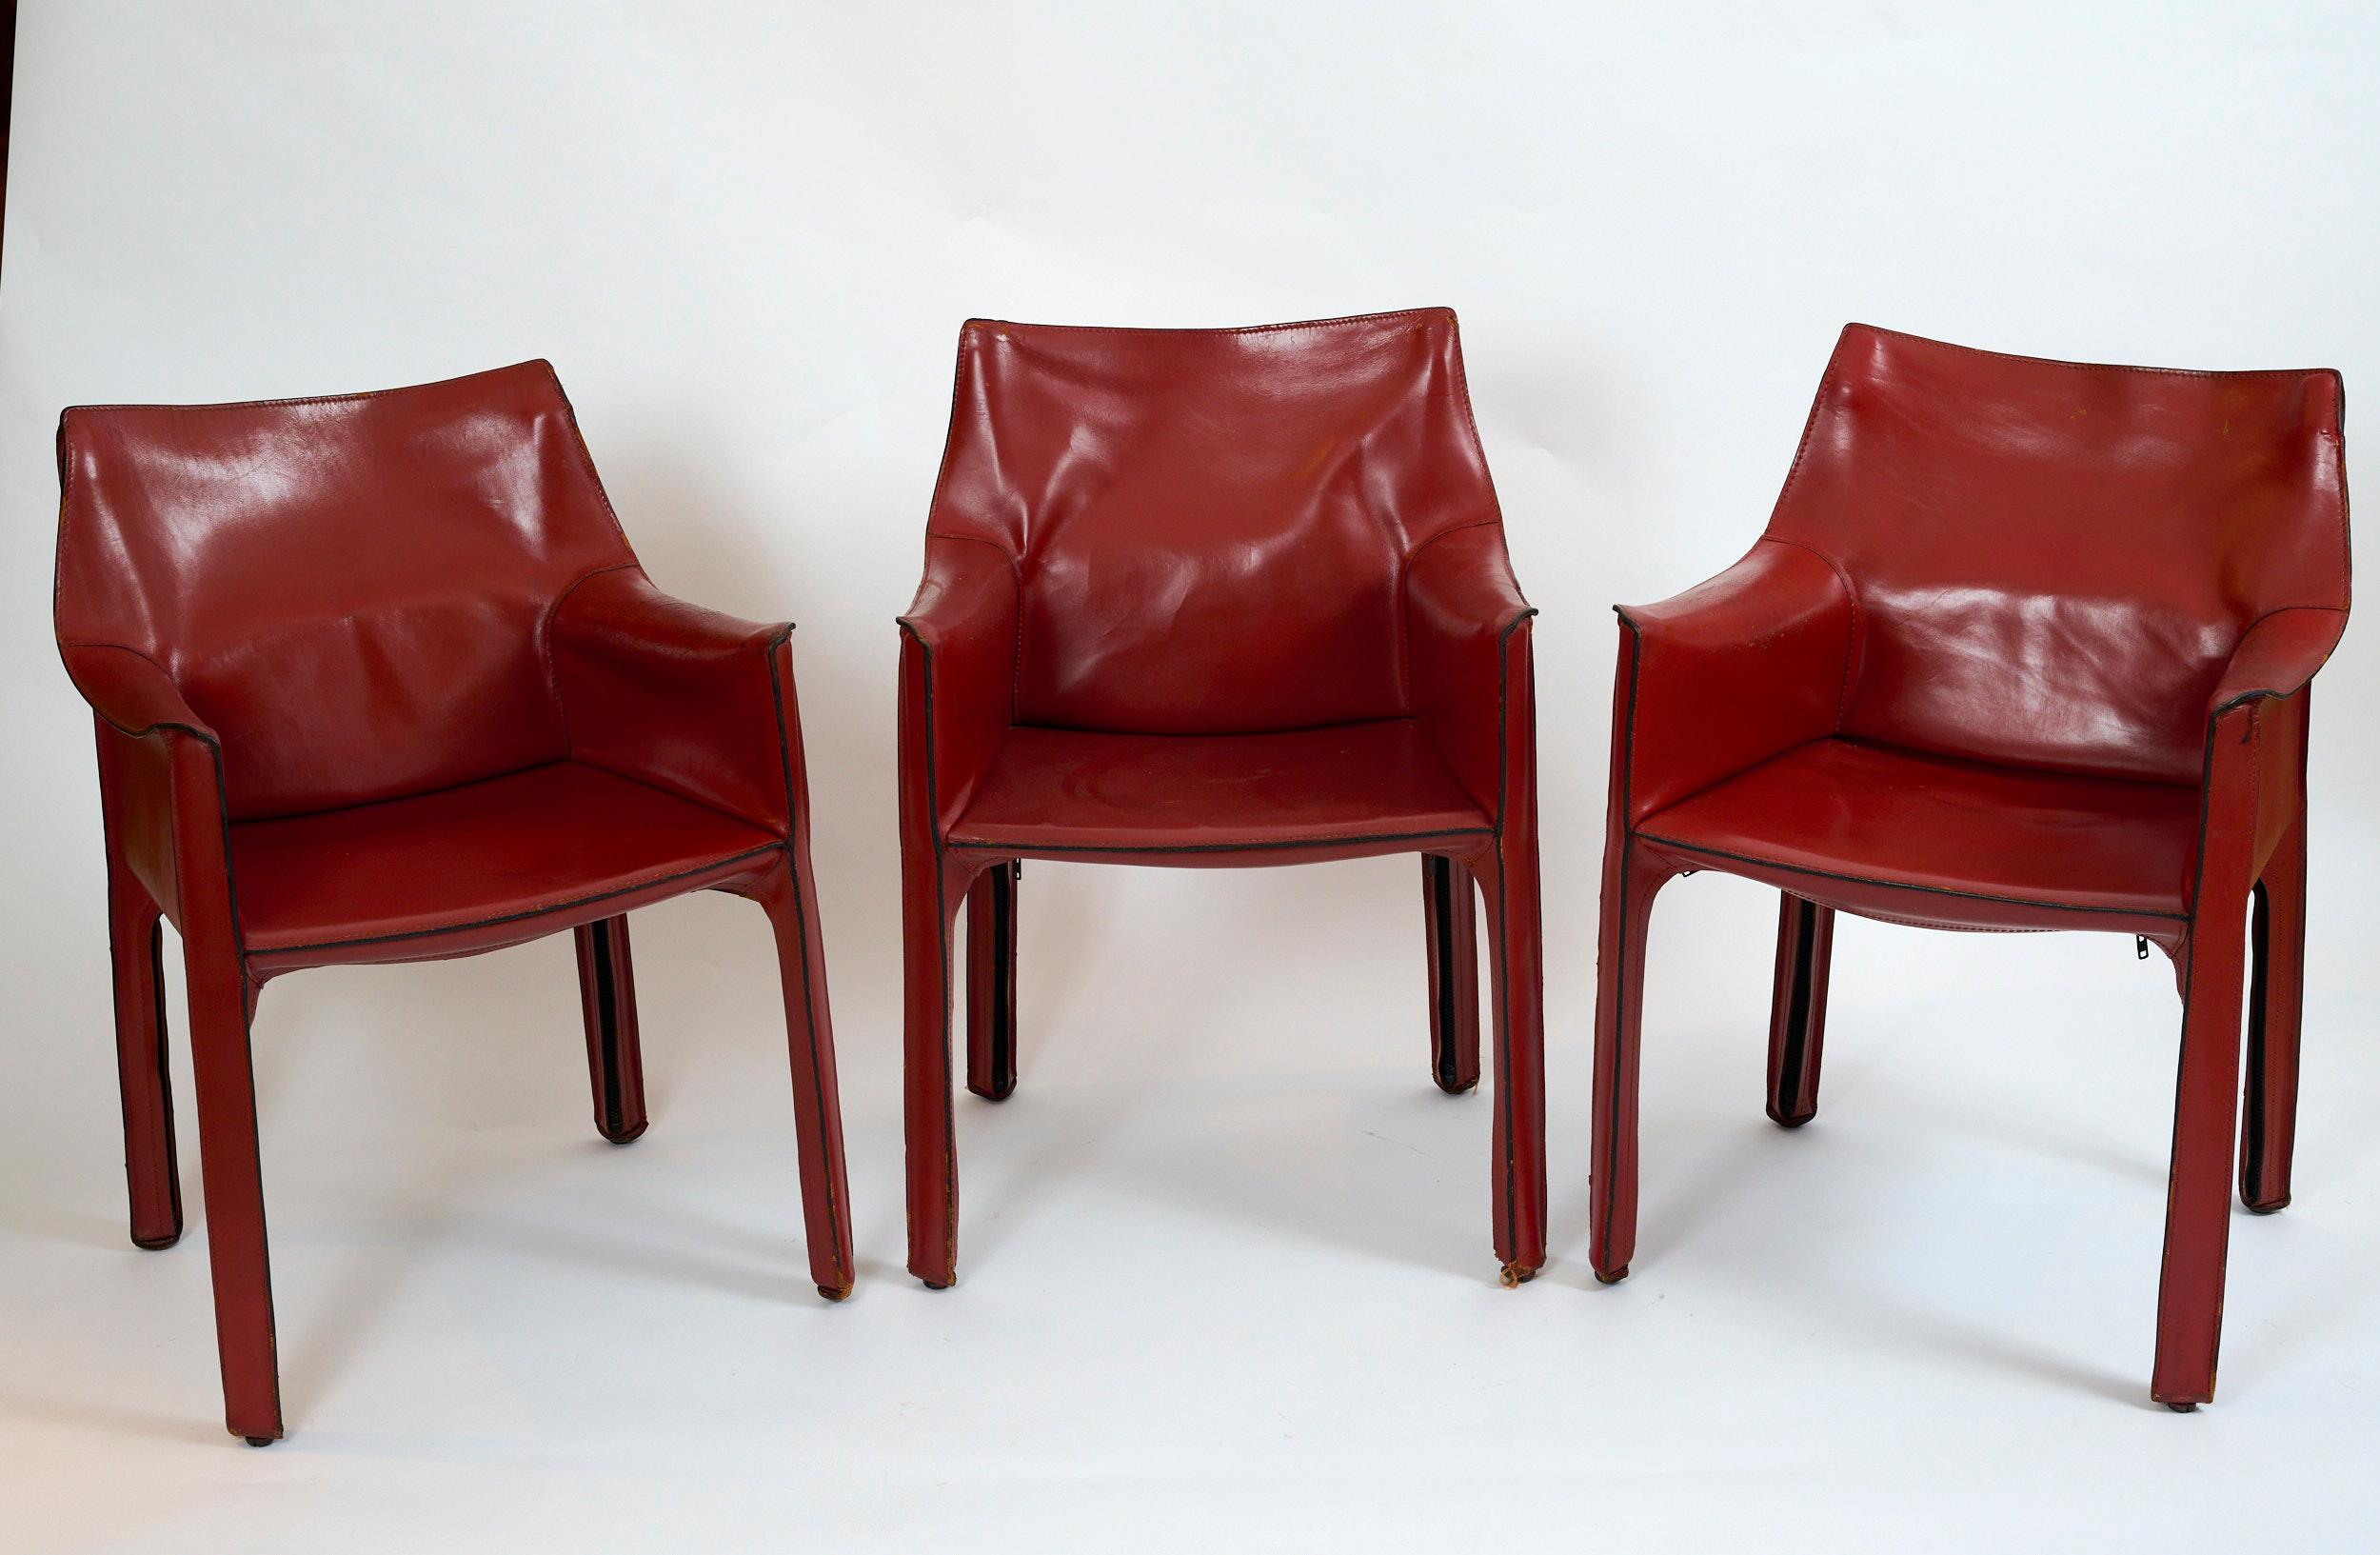 Original Mario Bellini cab chairs in oxblood

Please note there are 4 chairs now available ***


Wonderfully designed chairs with an internal metal structure encased by a single piece of leather and secured with zips.

The chairs have a wonderful